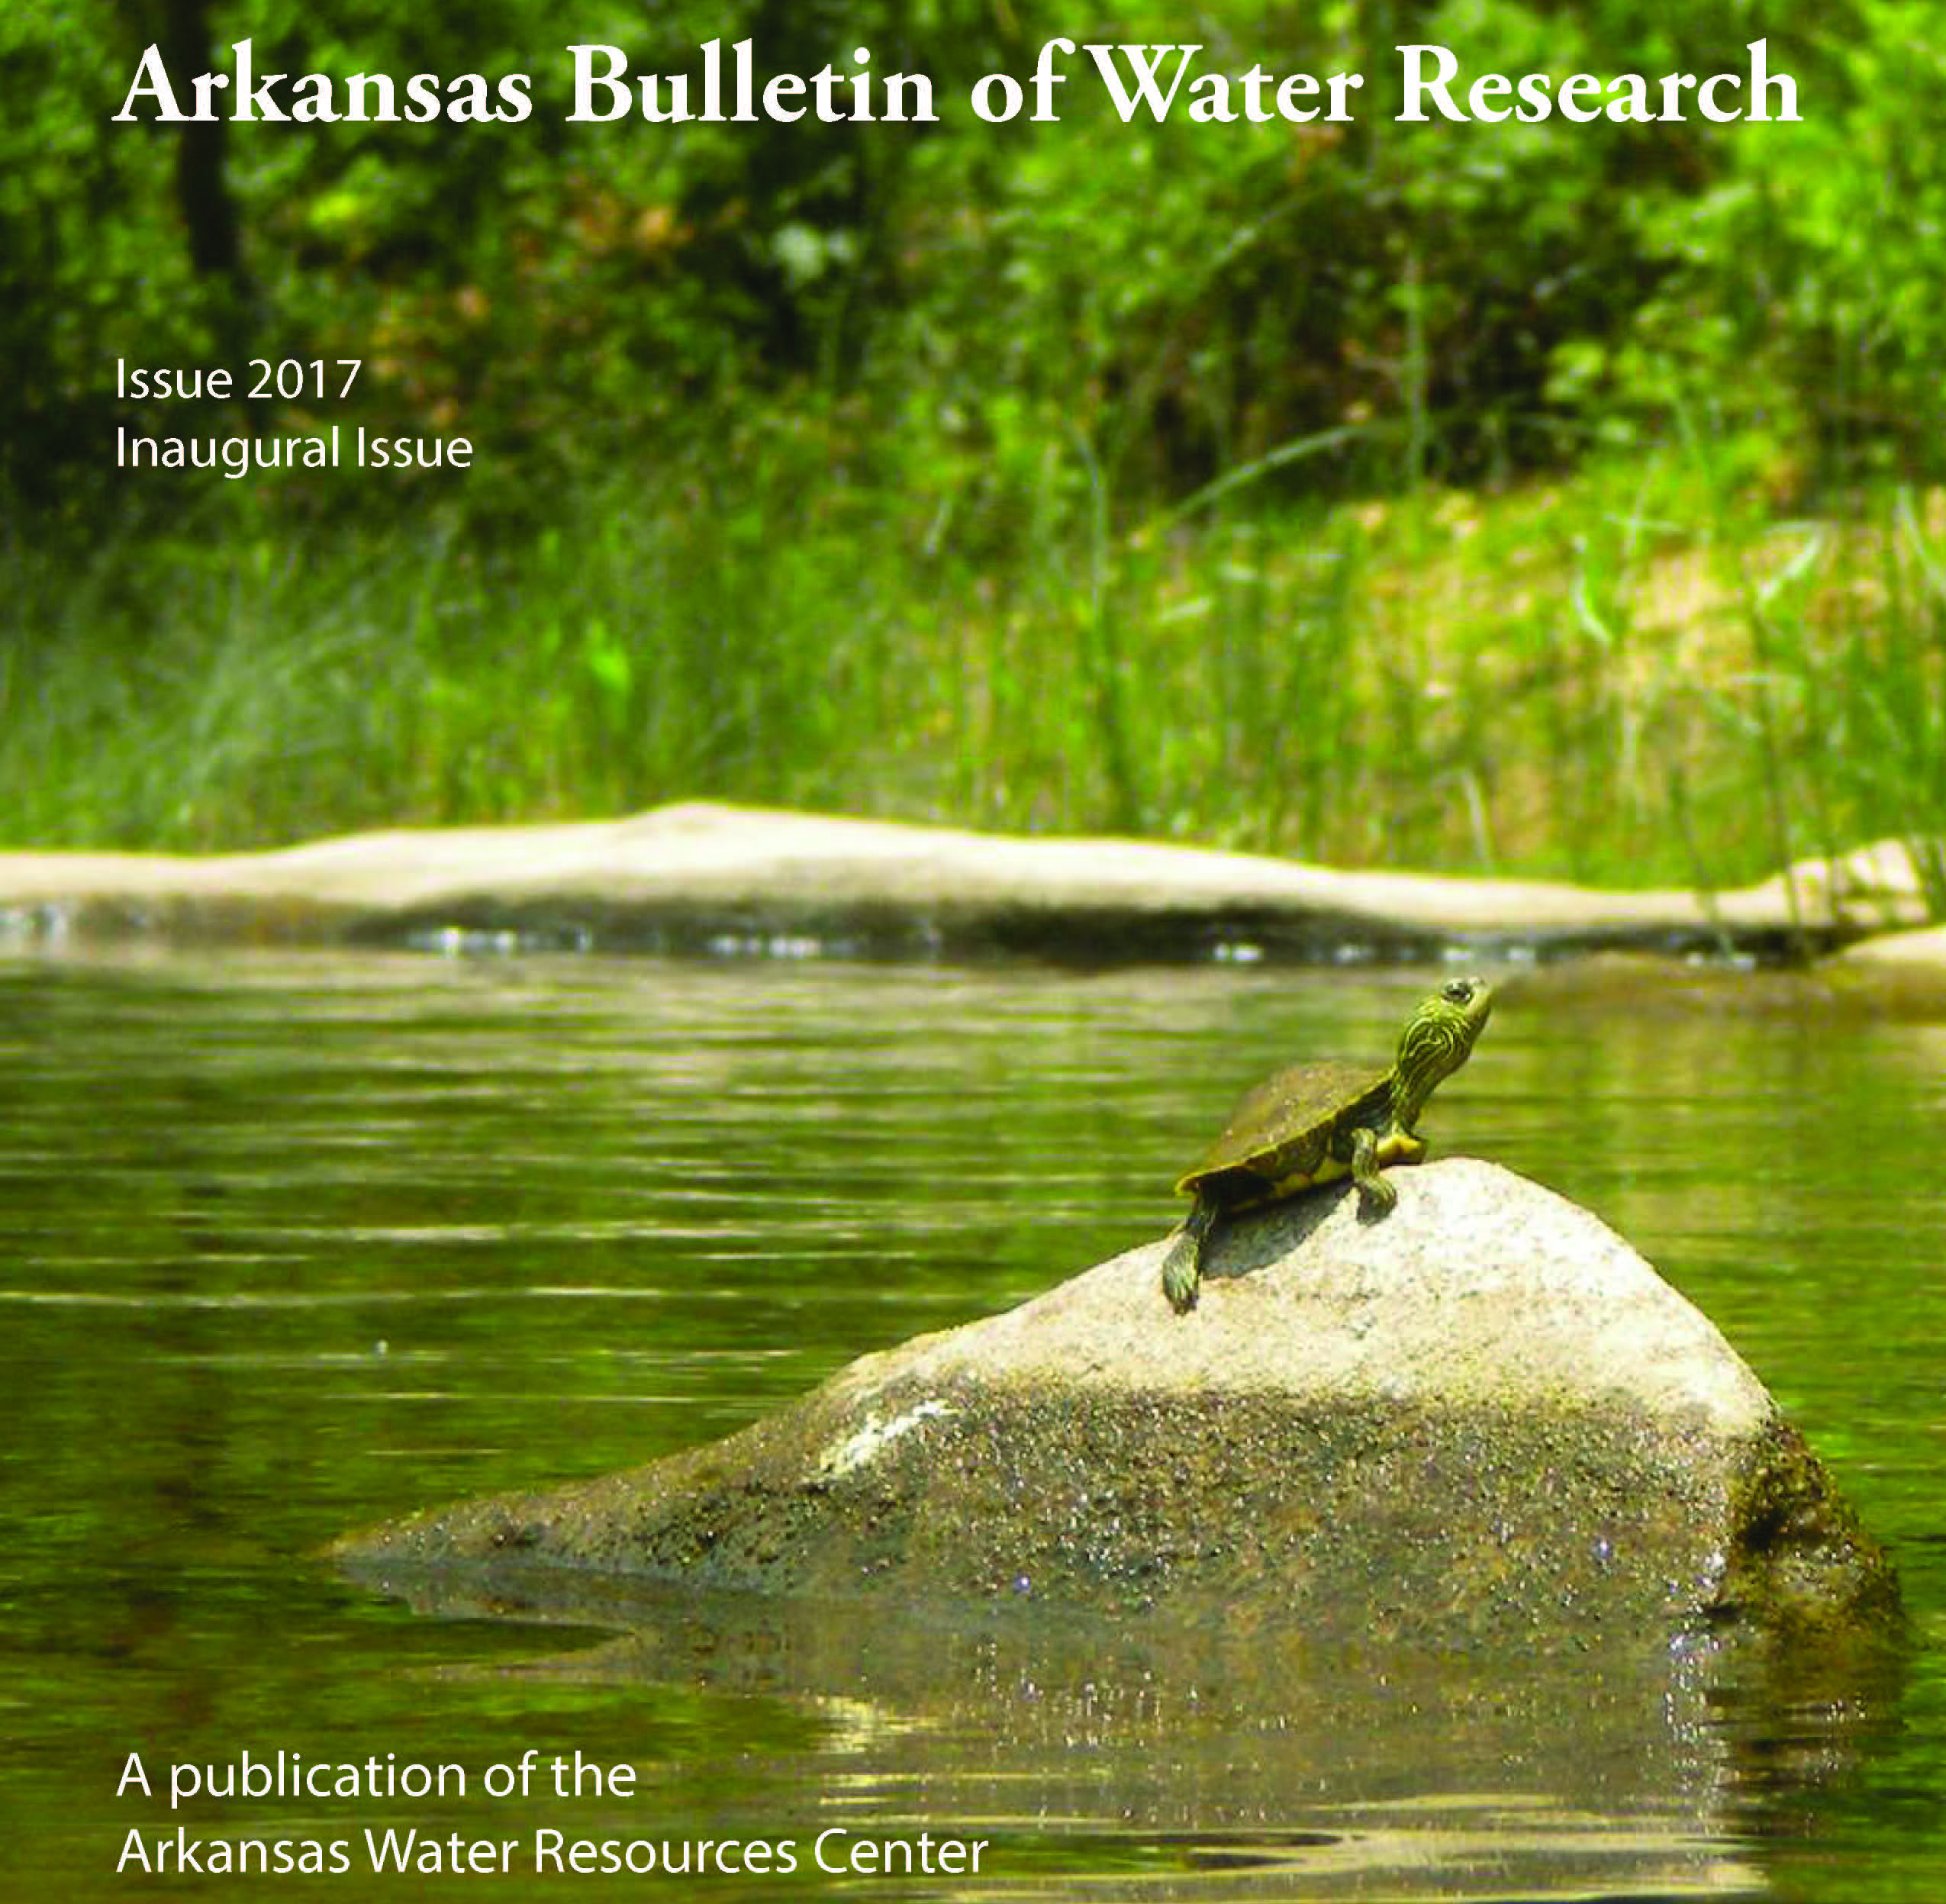 Deadline Extended to Submit Papers to the Arkansas Bulletin of Water Research